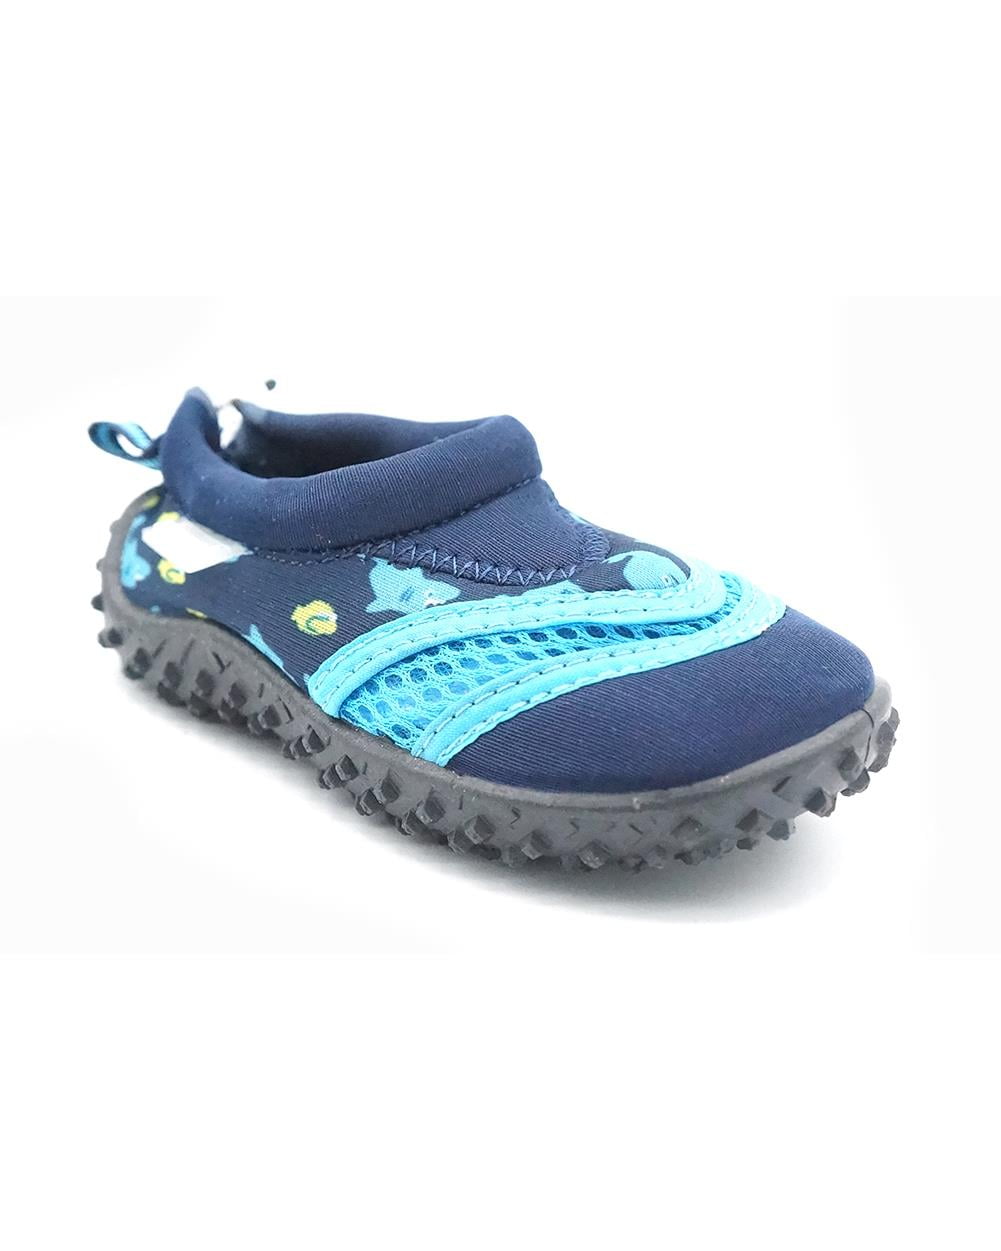 boys size 6 water shoes